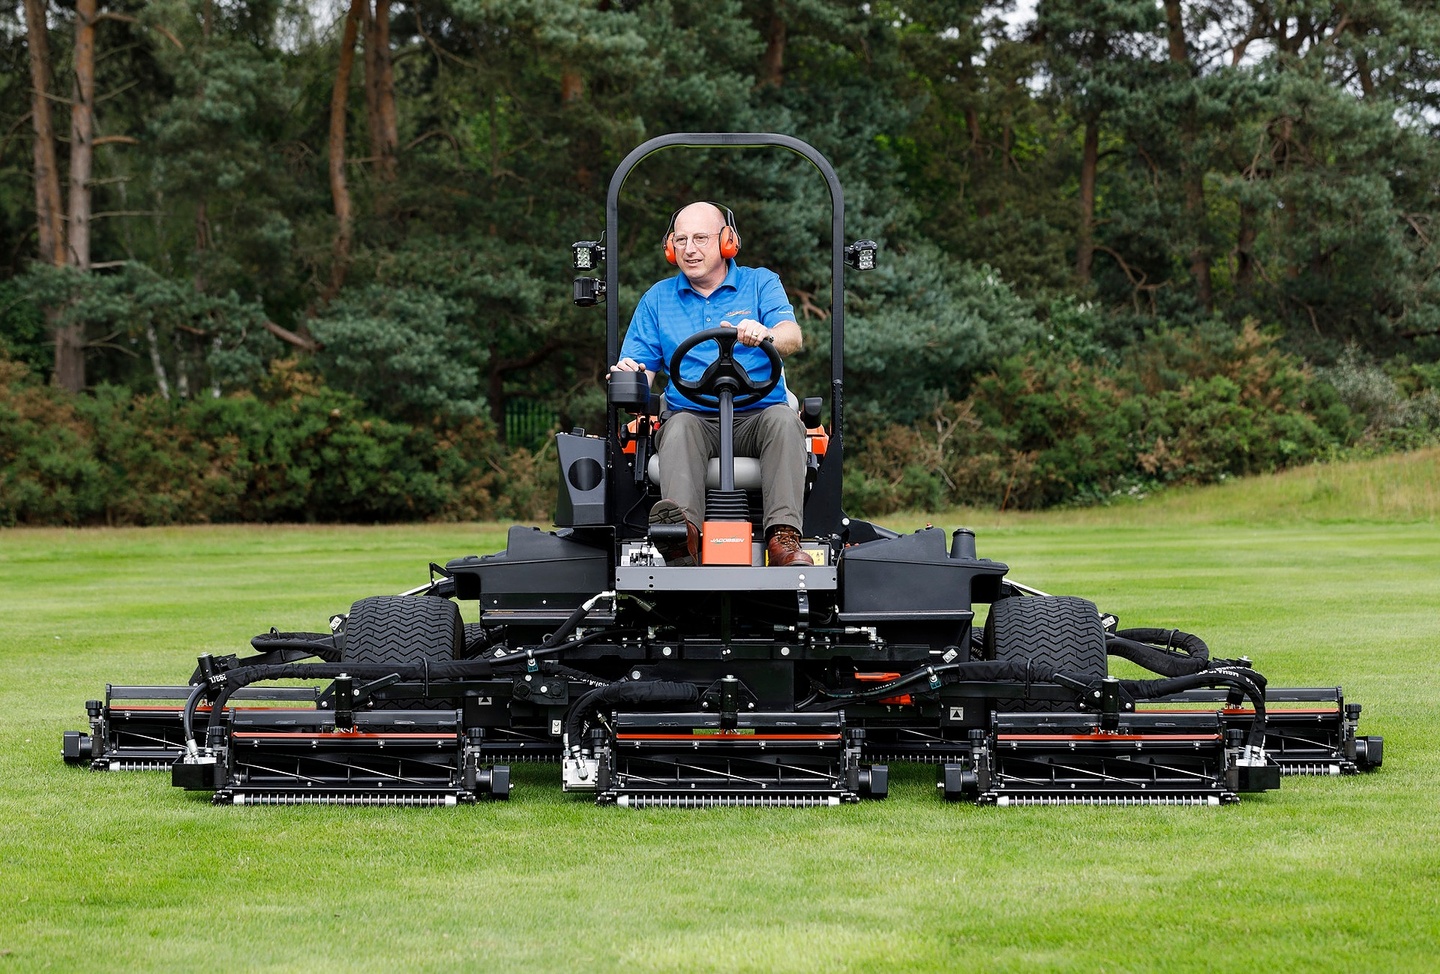 Jacobsen Turf on X: Here it is! Your first look at the majestic